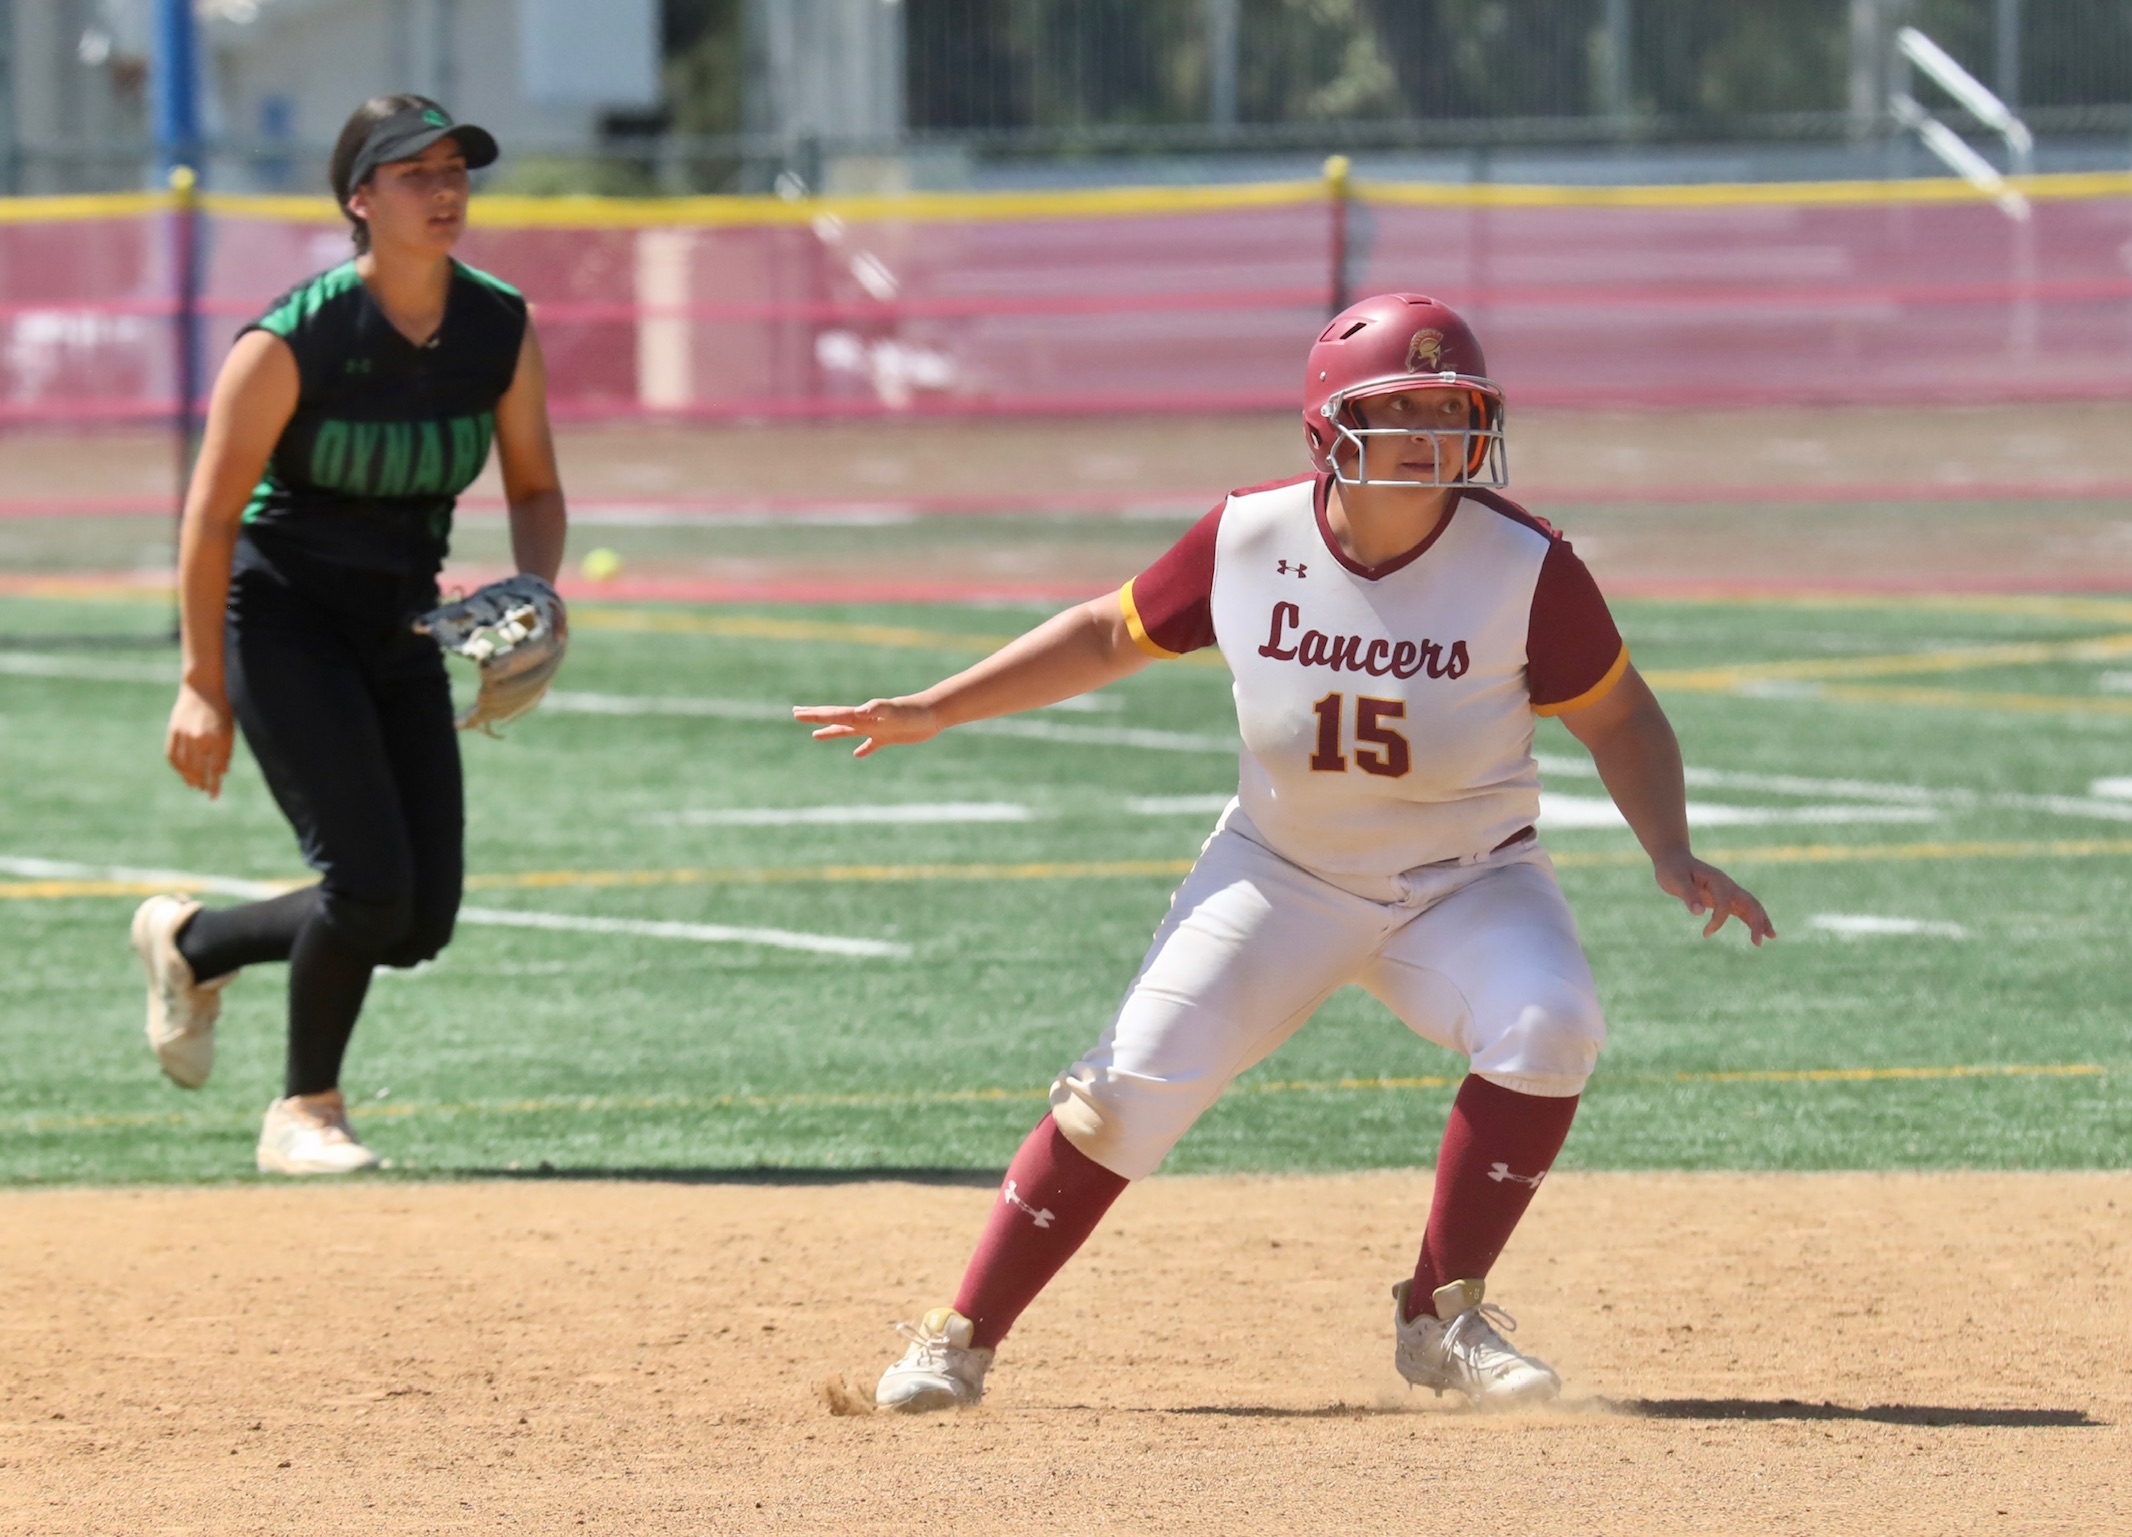 Giselle Lopez takes a leadoff while on the basepaths during PCC's win on Friday (photo by Michael Watkins, PCC Athletics).